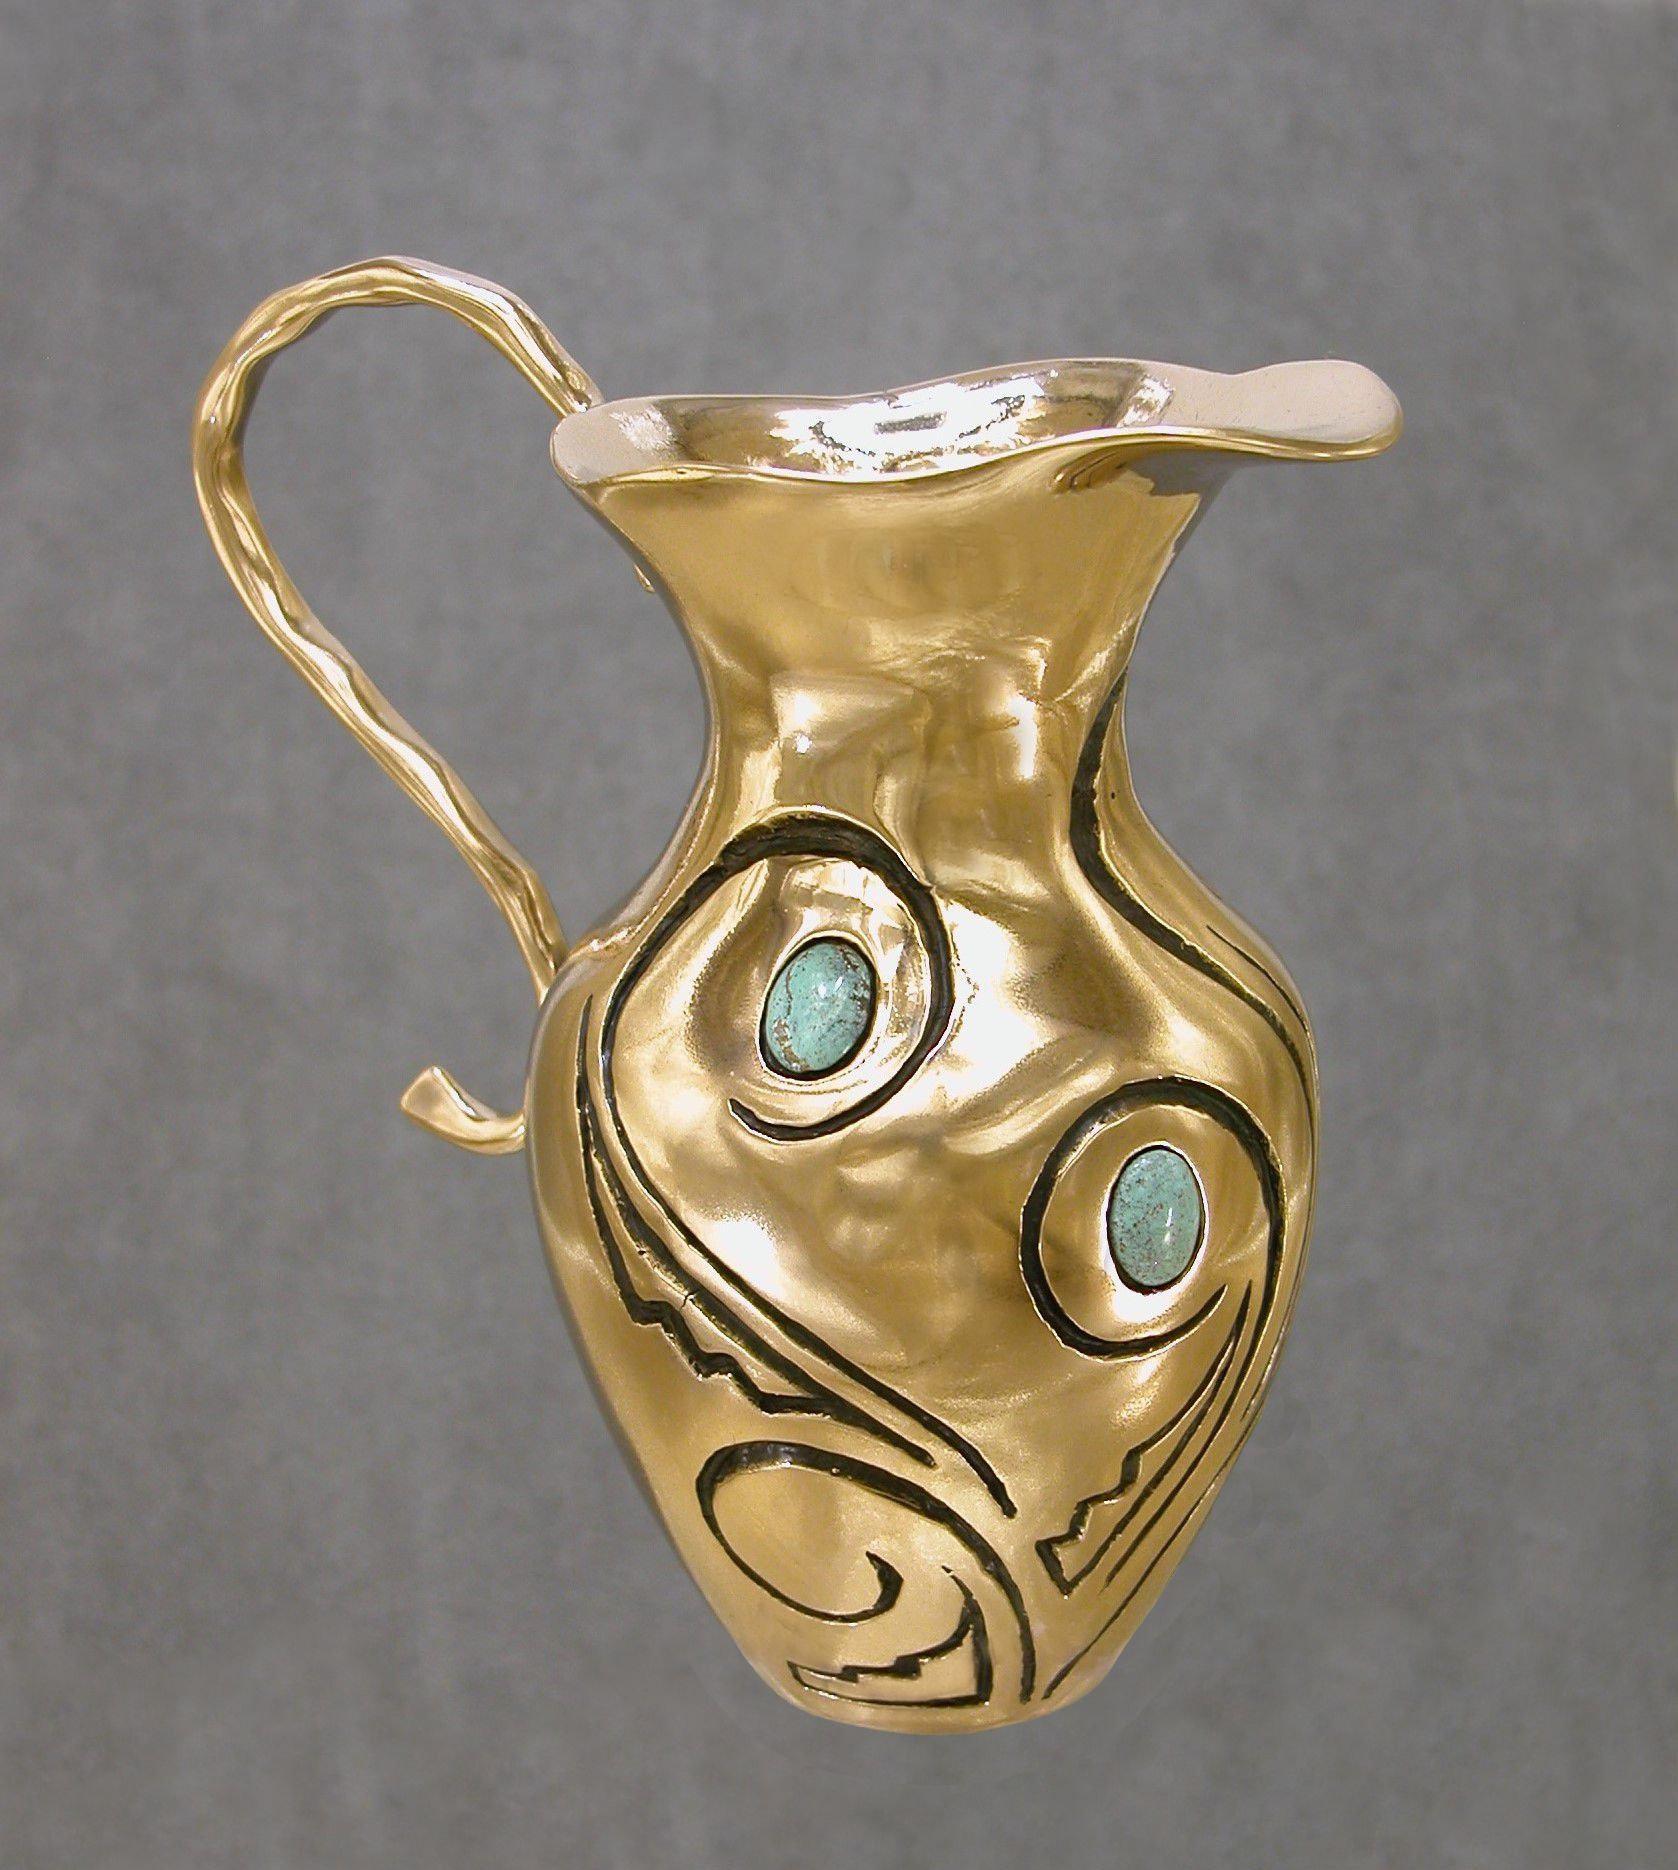 Water Vessel With Turquoise-Sculpture-Christin Ortiz-Sorrel Sky Gallery